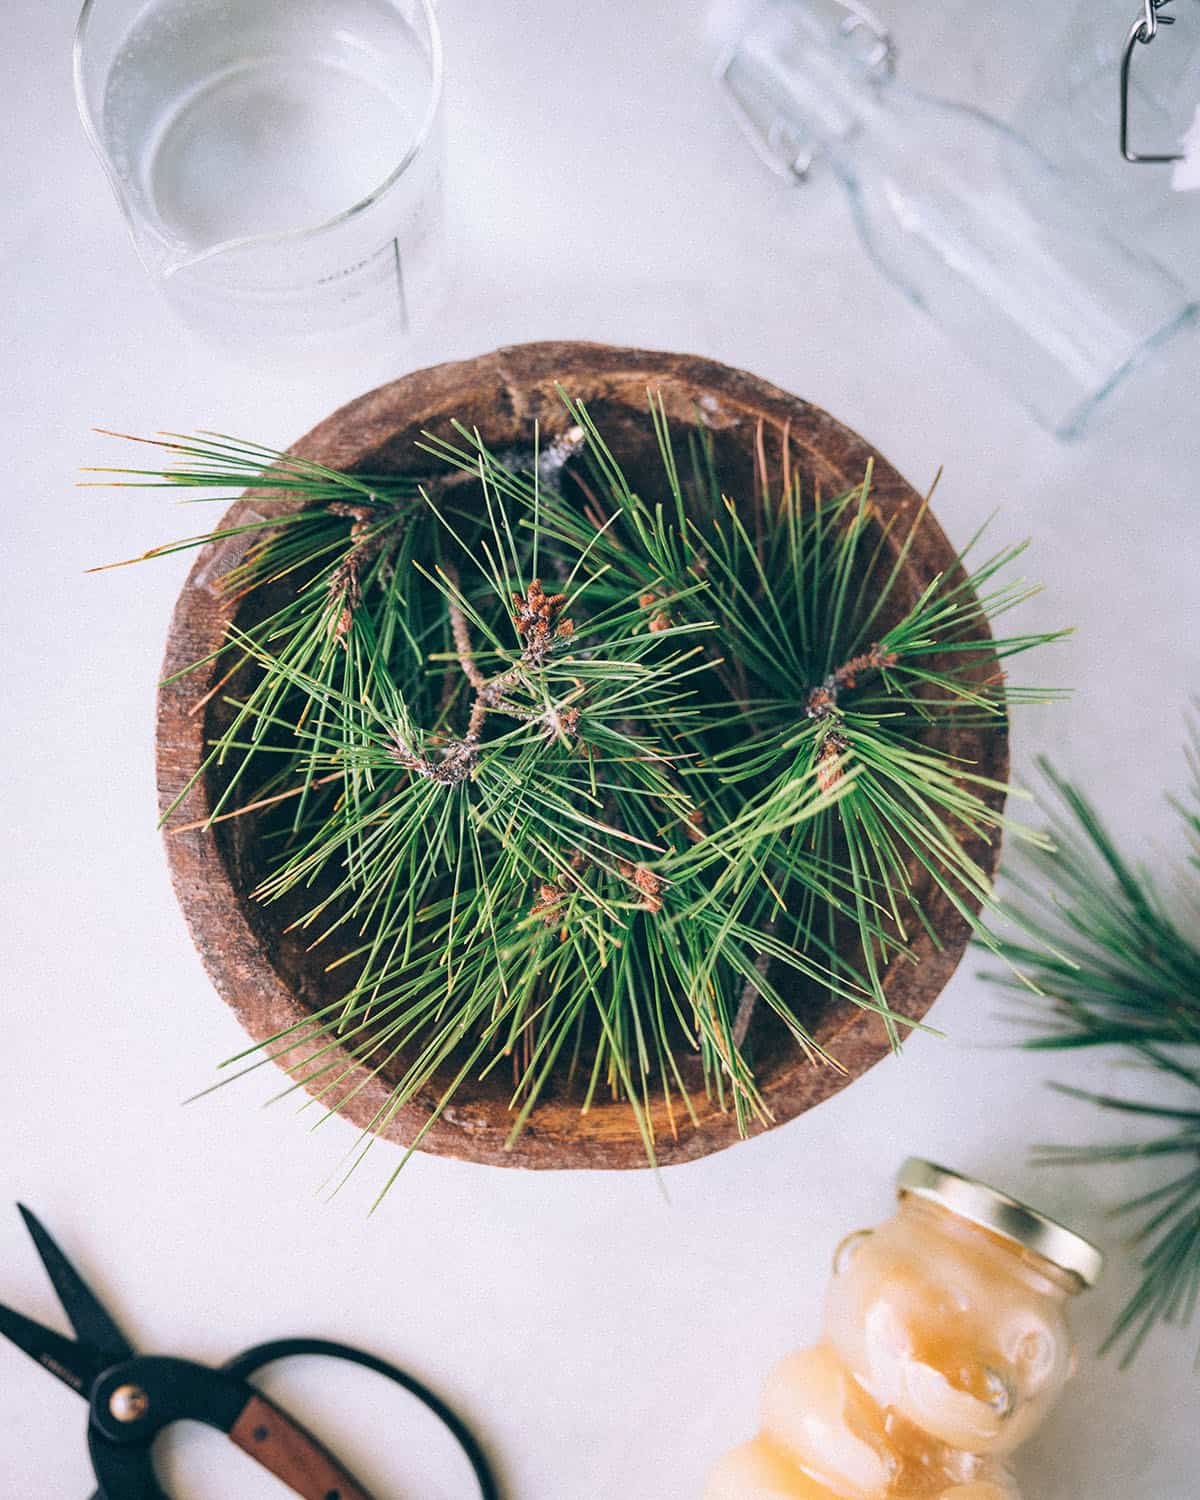 Foraged pine needle clusters in a wood bowl on a white surface, surrounded by empty bottles, fresh pine needles, and scissors. 